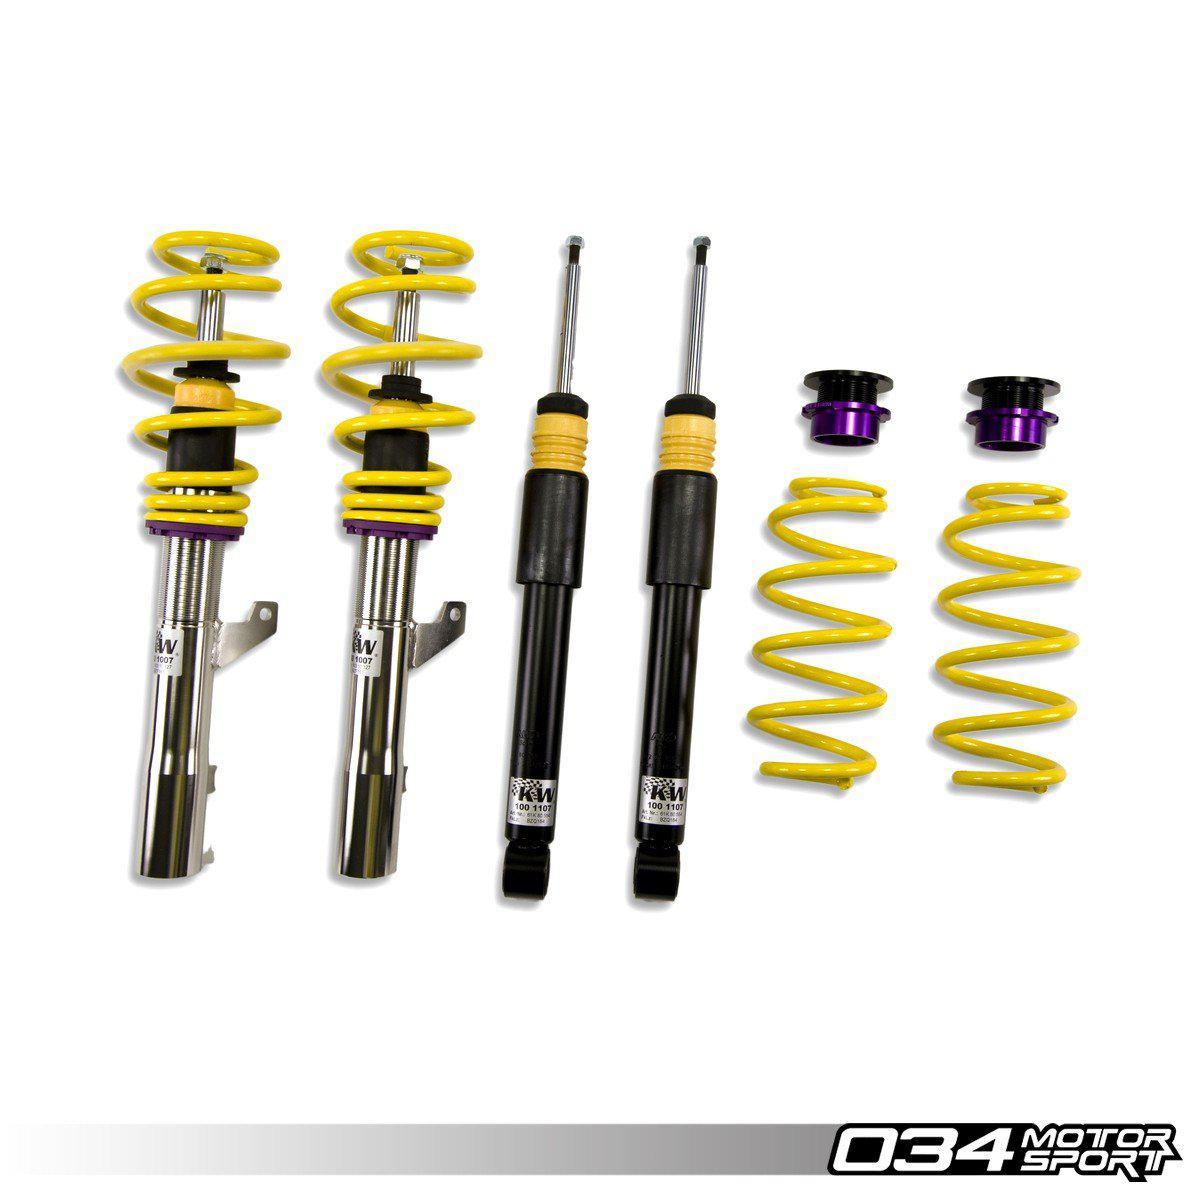 KW Variant 2 Coilover Suspension, 8p Audi A3 Quattro &amp; B6/B7 Volkswagen Passat With Edc-A Little Tuning Co